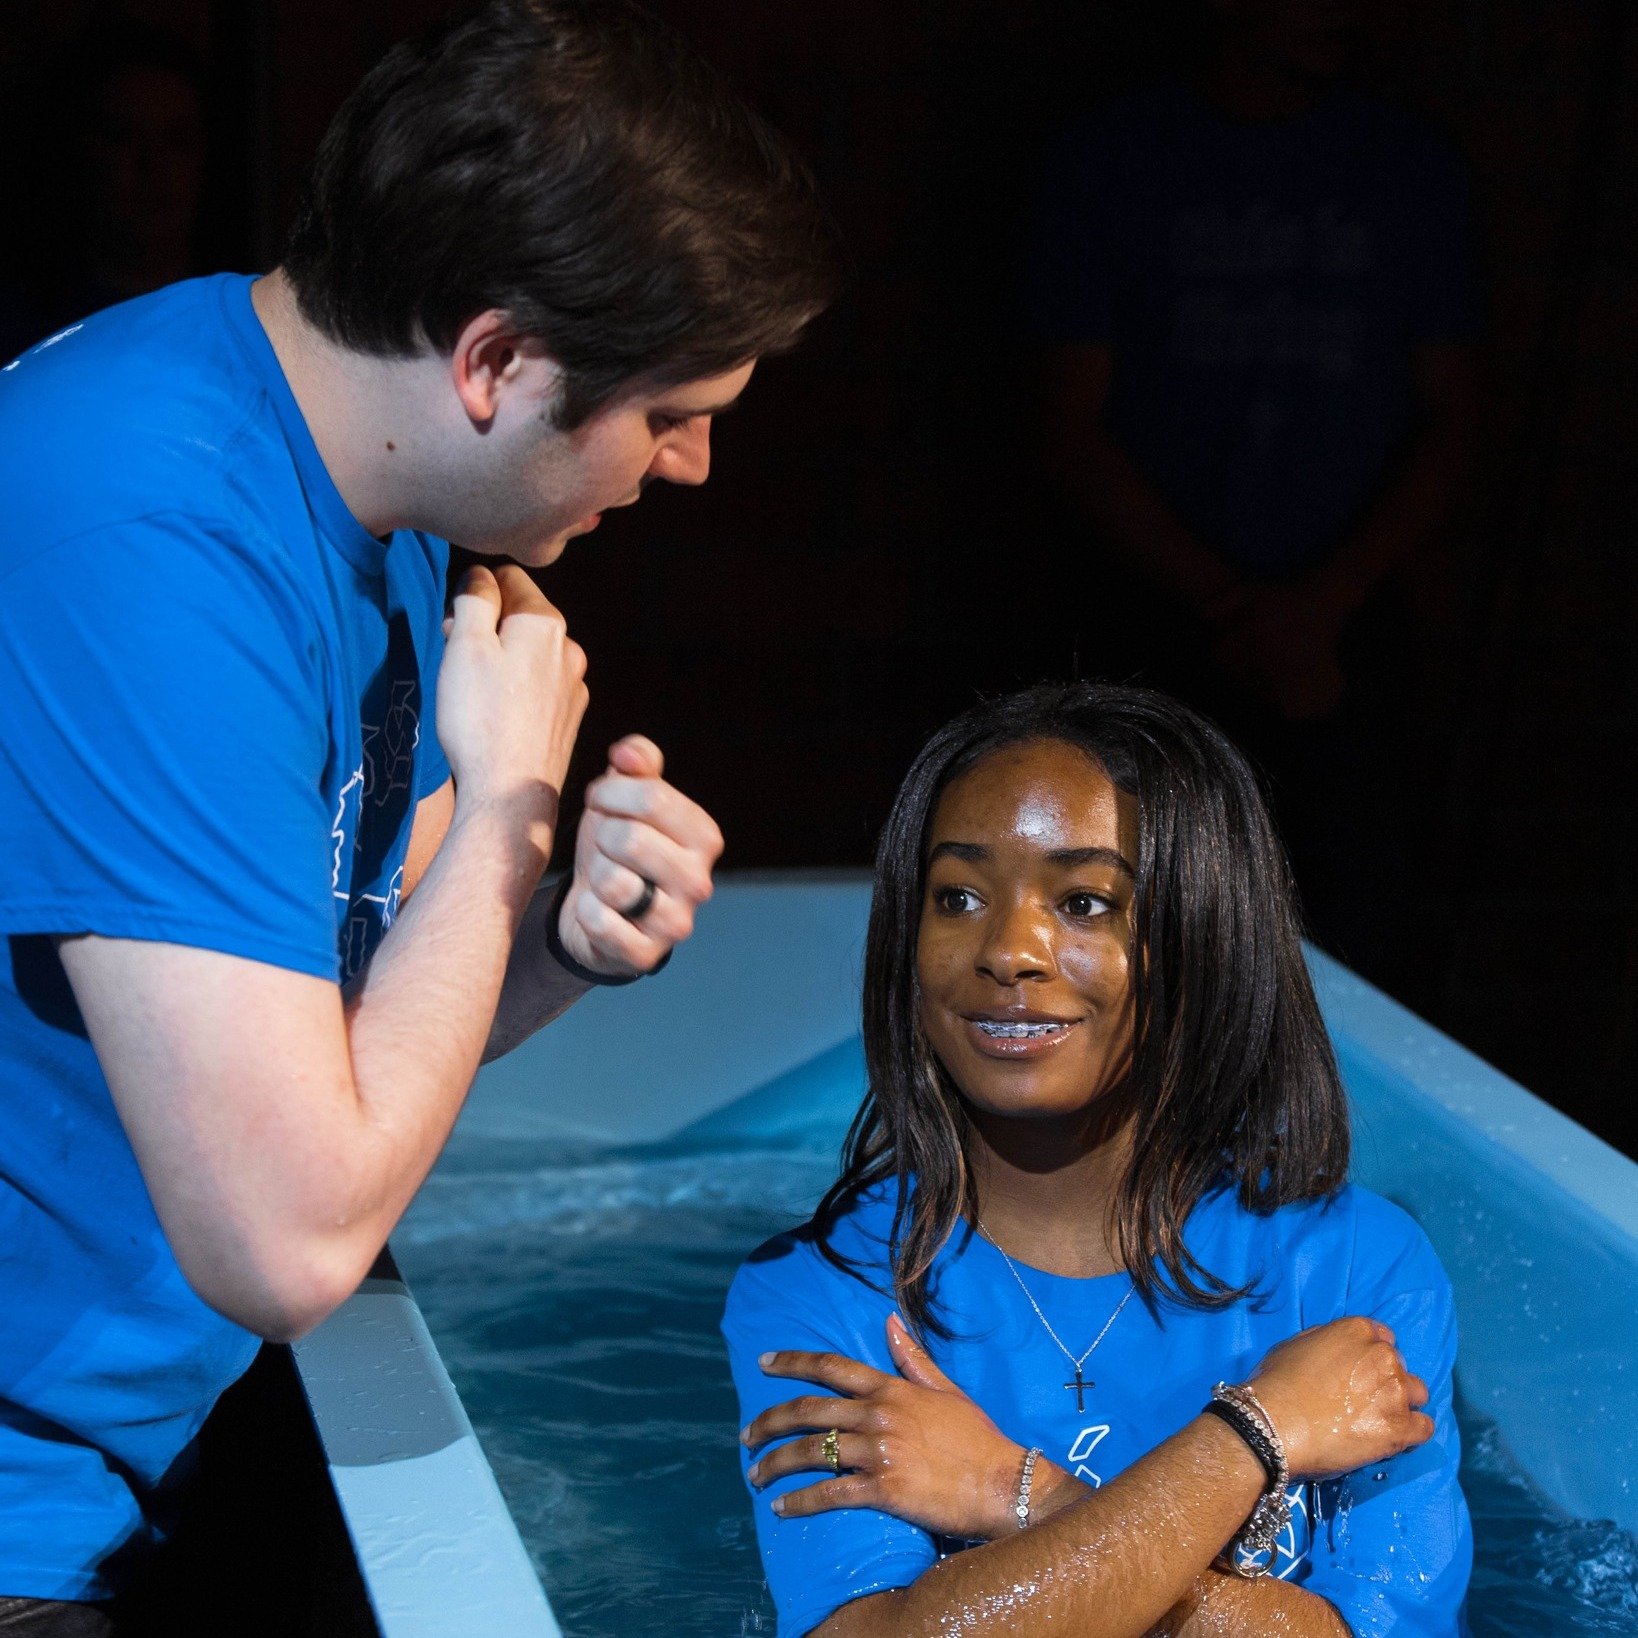 We believe Jesus commanded all believers to be baptized by immersion in water. This is a symbol of the Christian&rsquo;s identification with Christ in His death, burial, and resurrection. (Matthew 28:19, Romans 6:4, Colossians 2:12, Acts 8:36-39)

Th